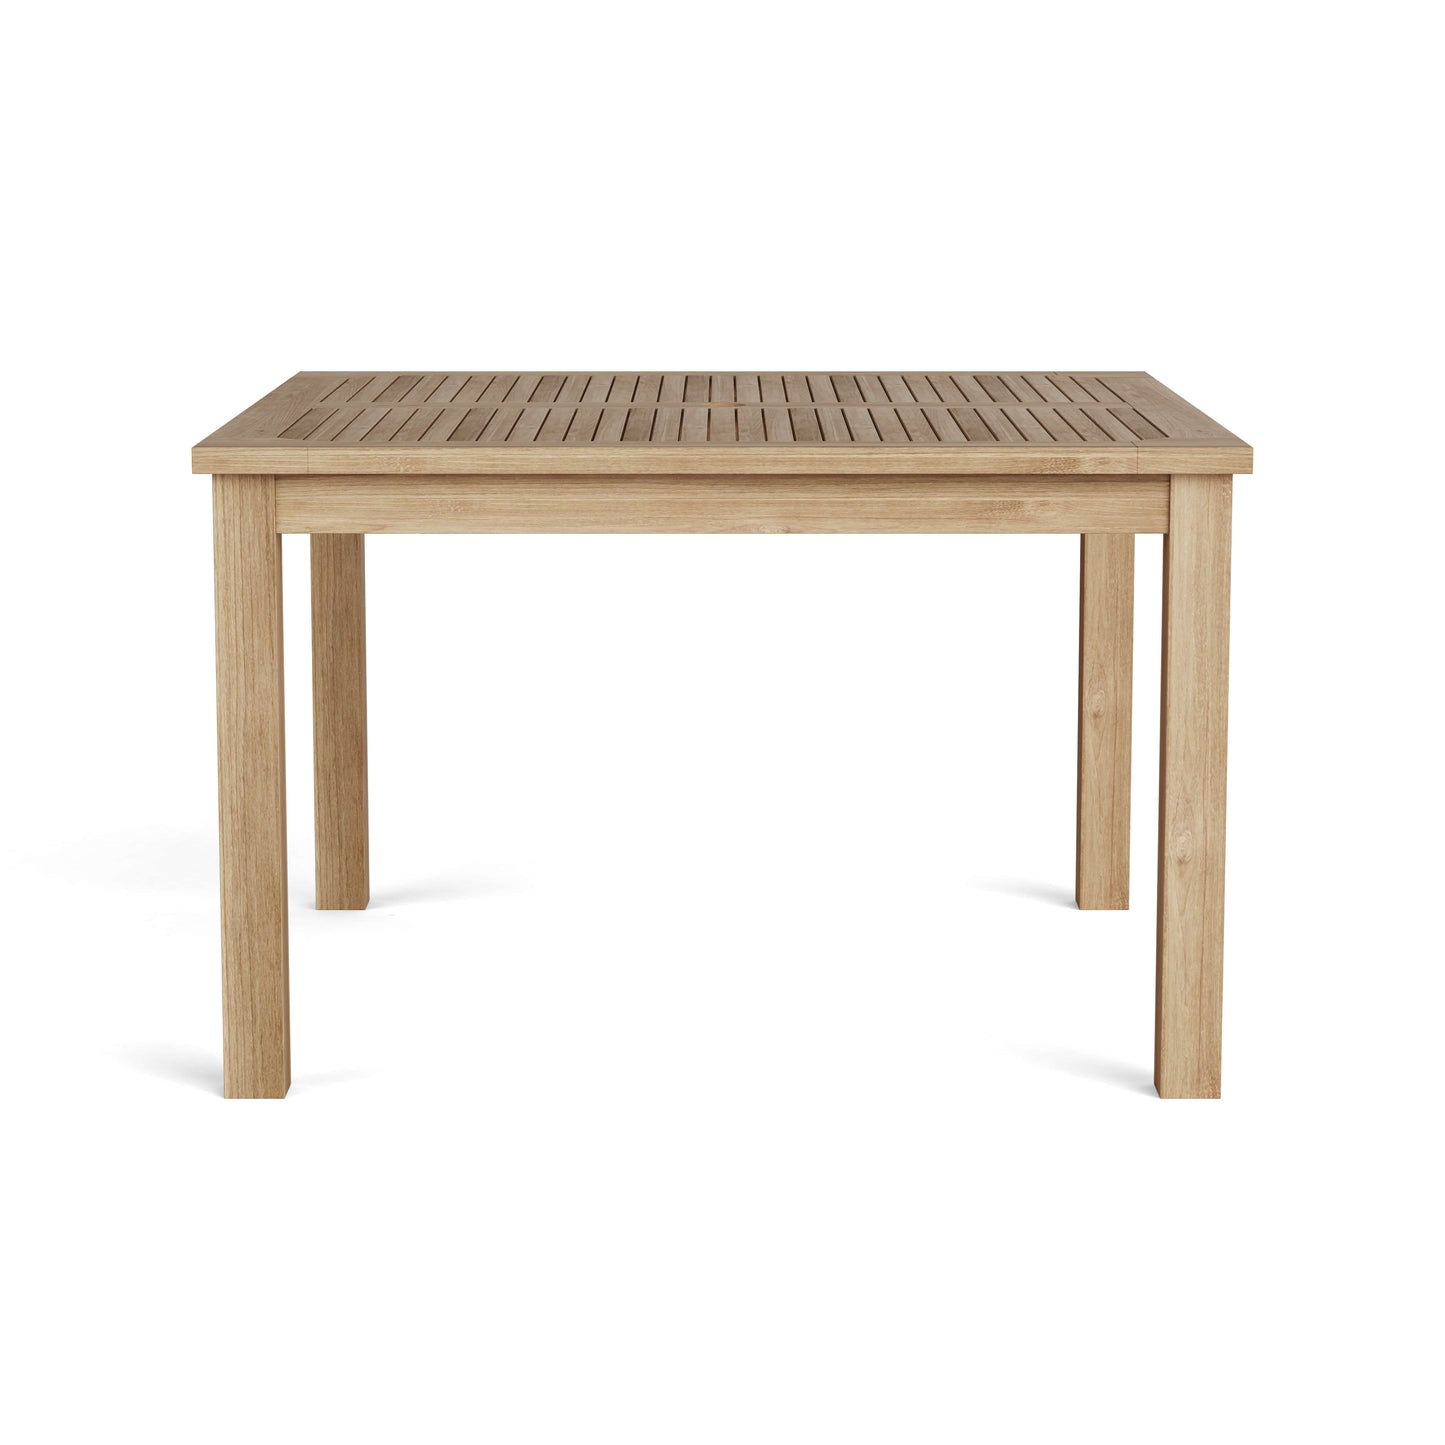 47" Windsor Square Small Slat Dining Table - Addison Foster